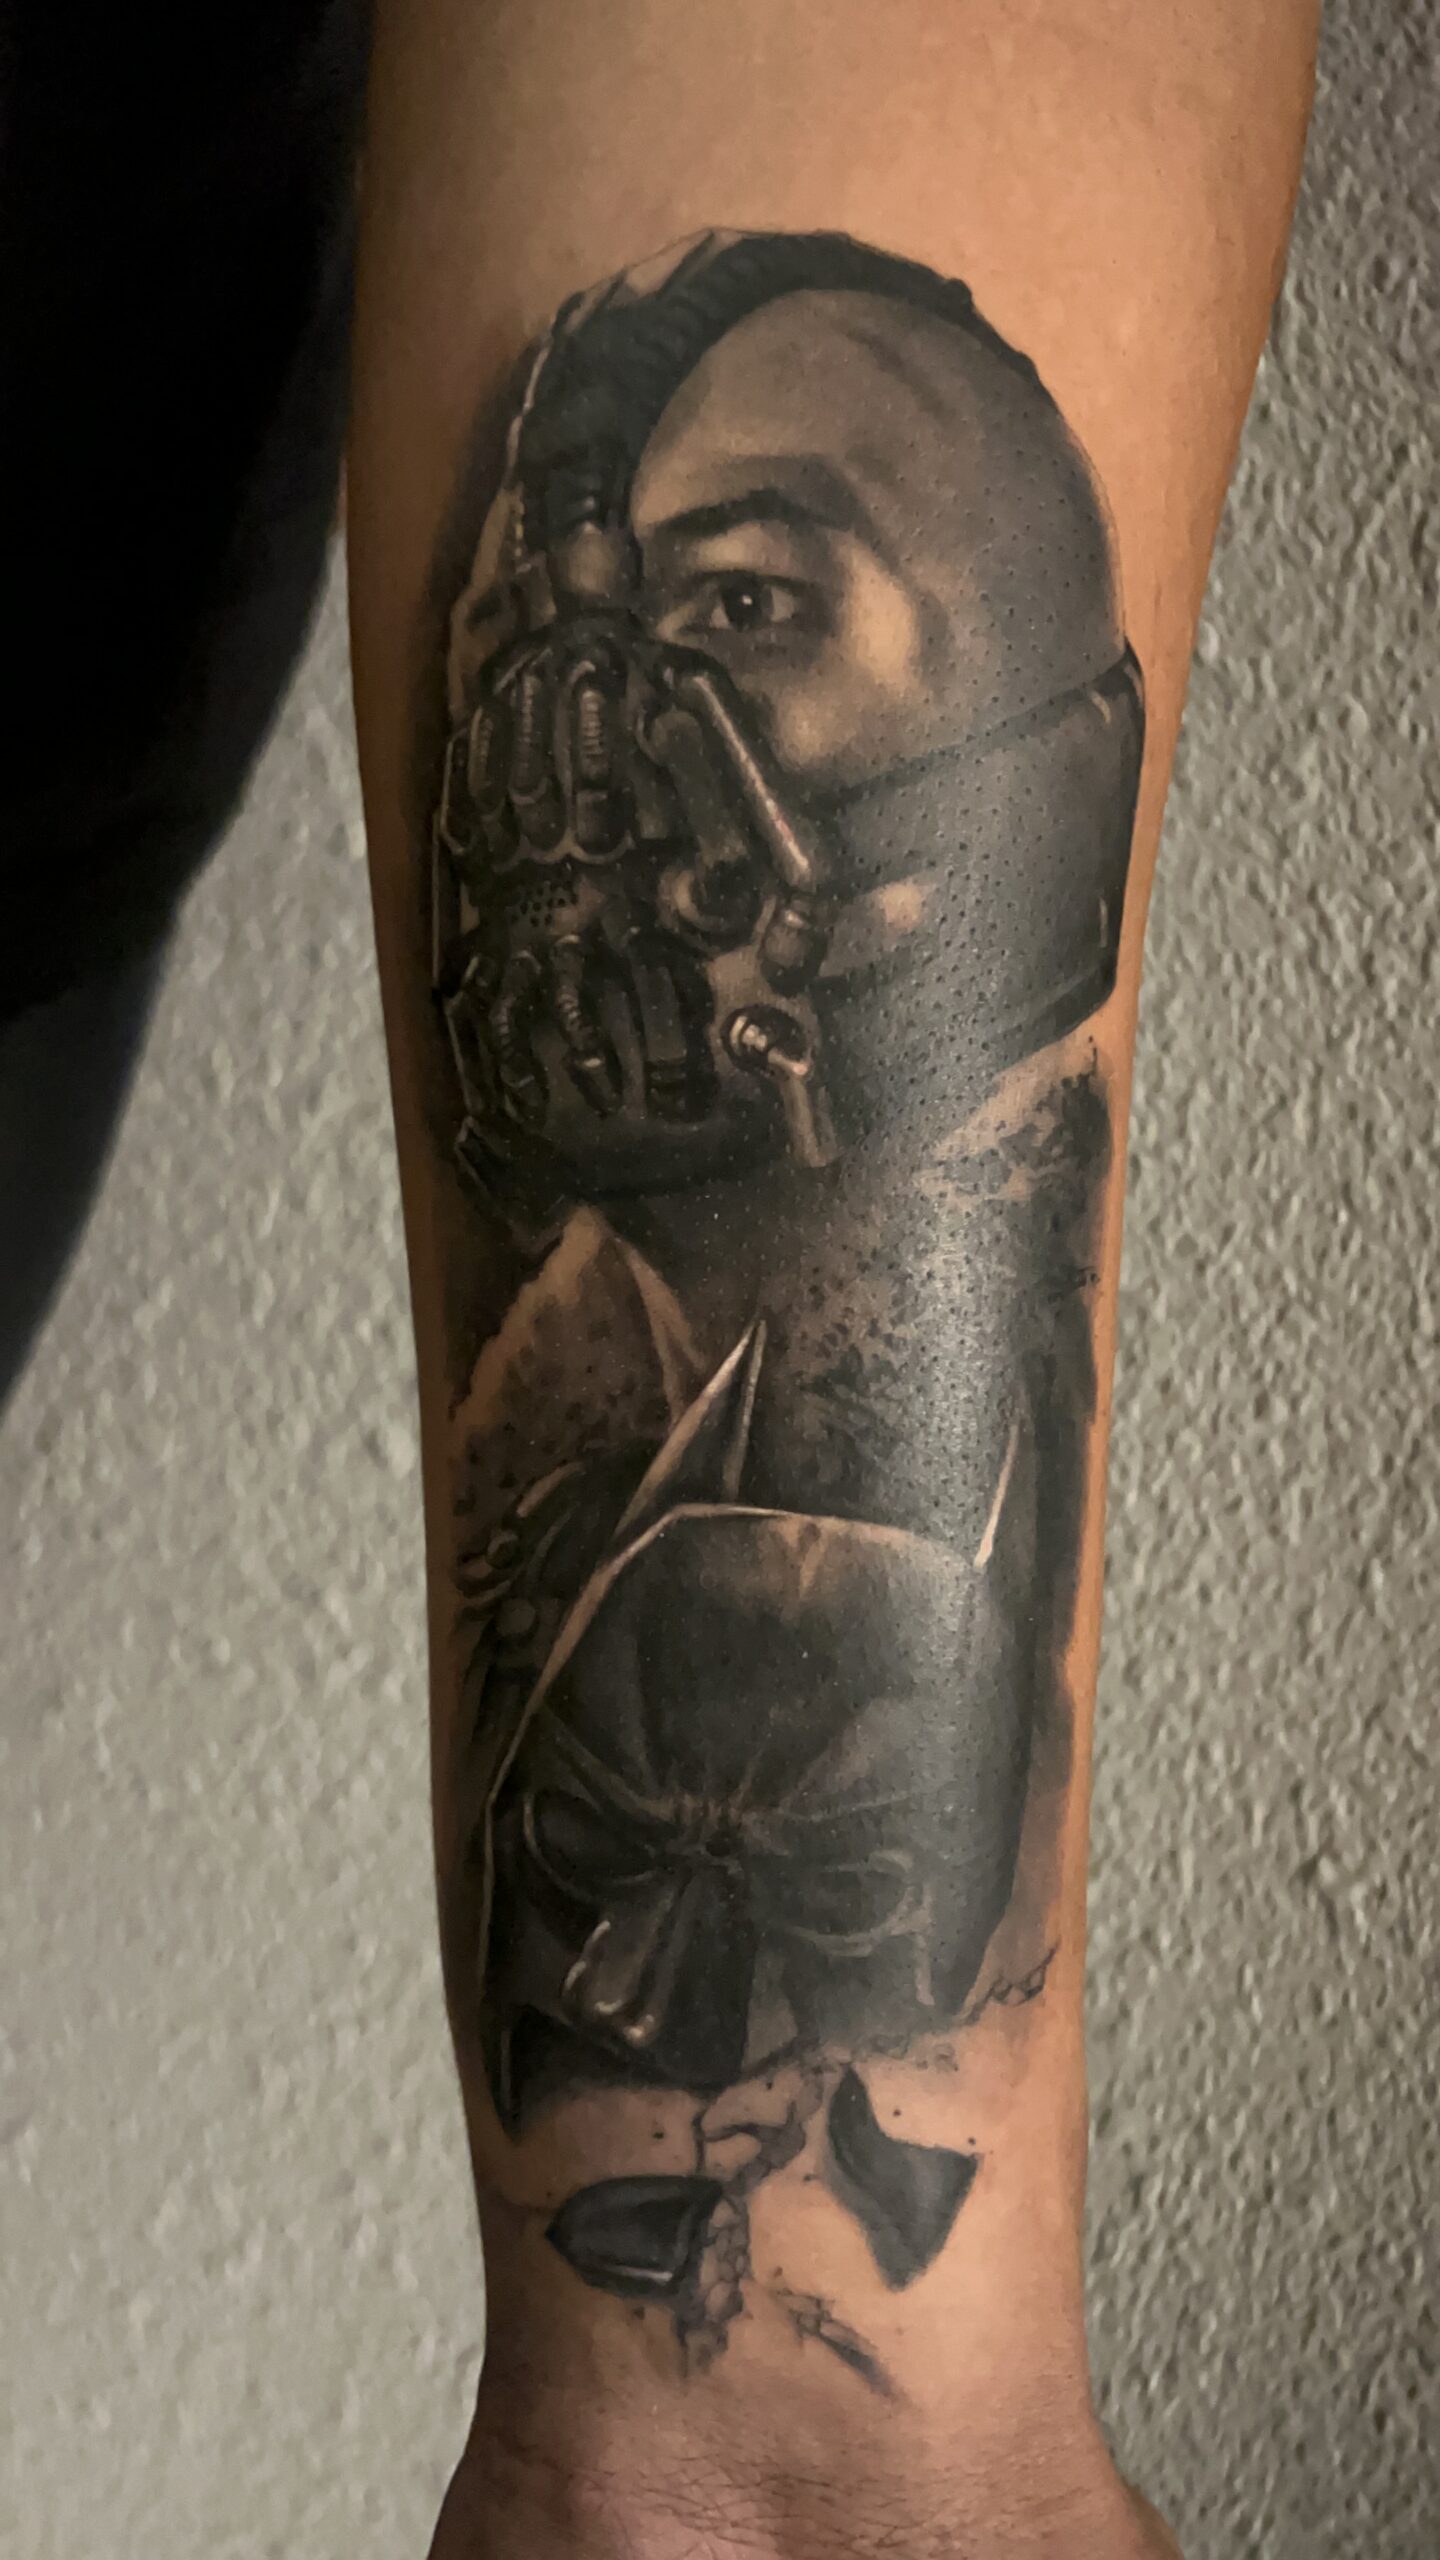 Louder Than Bombs Tattoo  By Roche Star Wars tie fighter pilot done on my  budd scott Every day is a good day for star wars tattoos but today was  even more